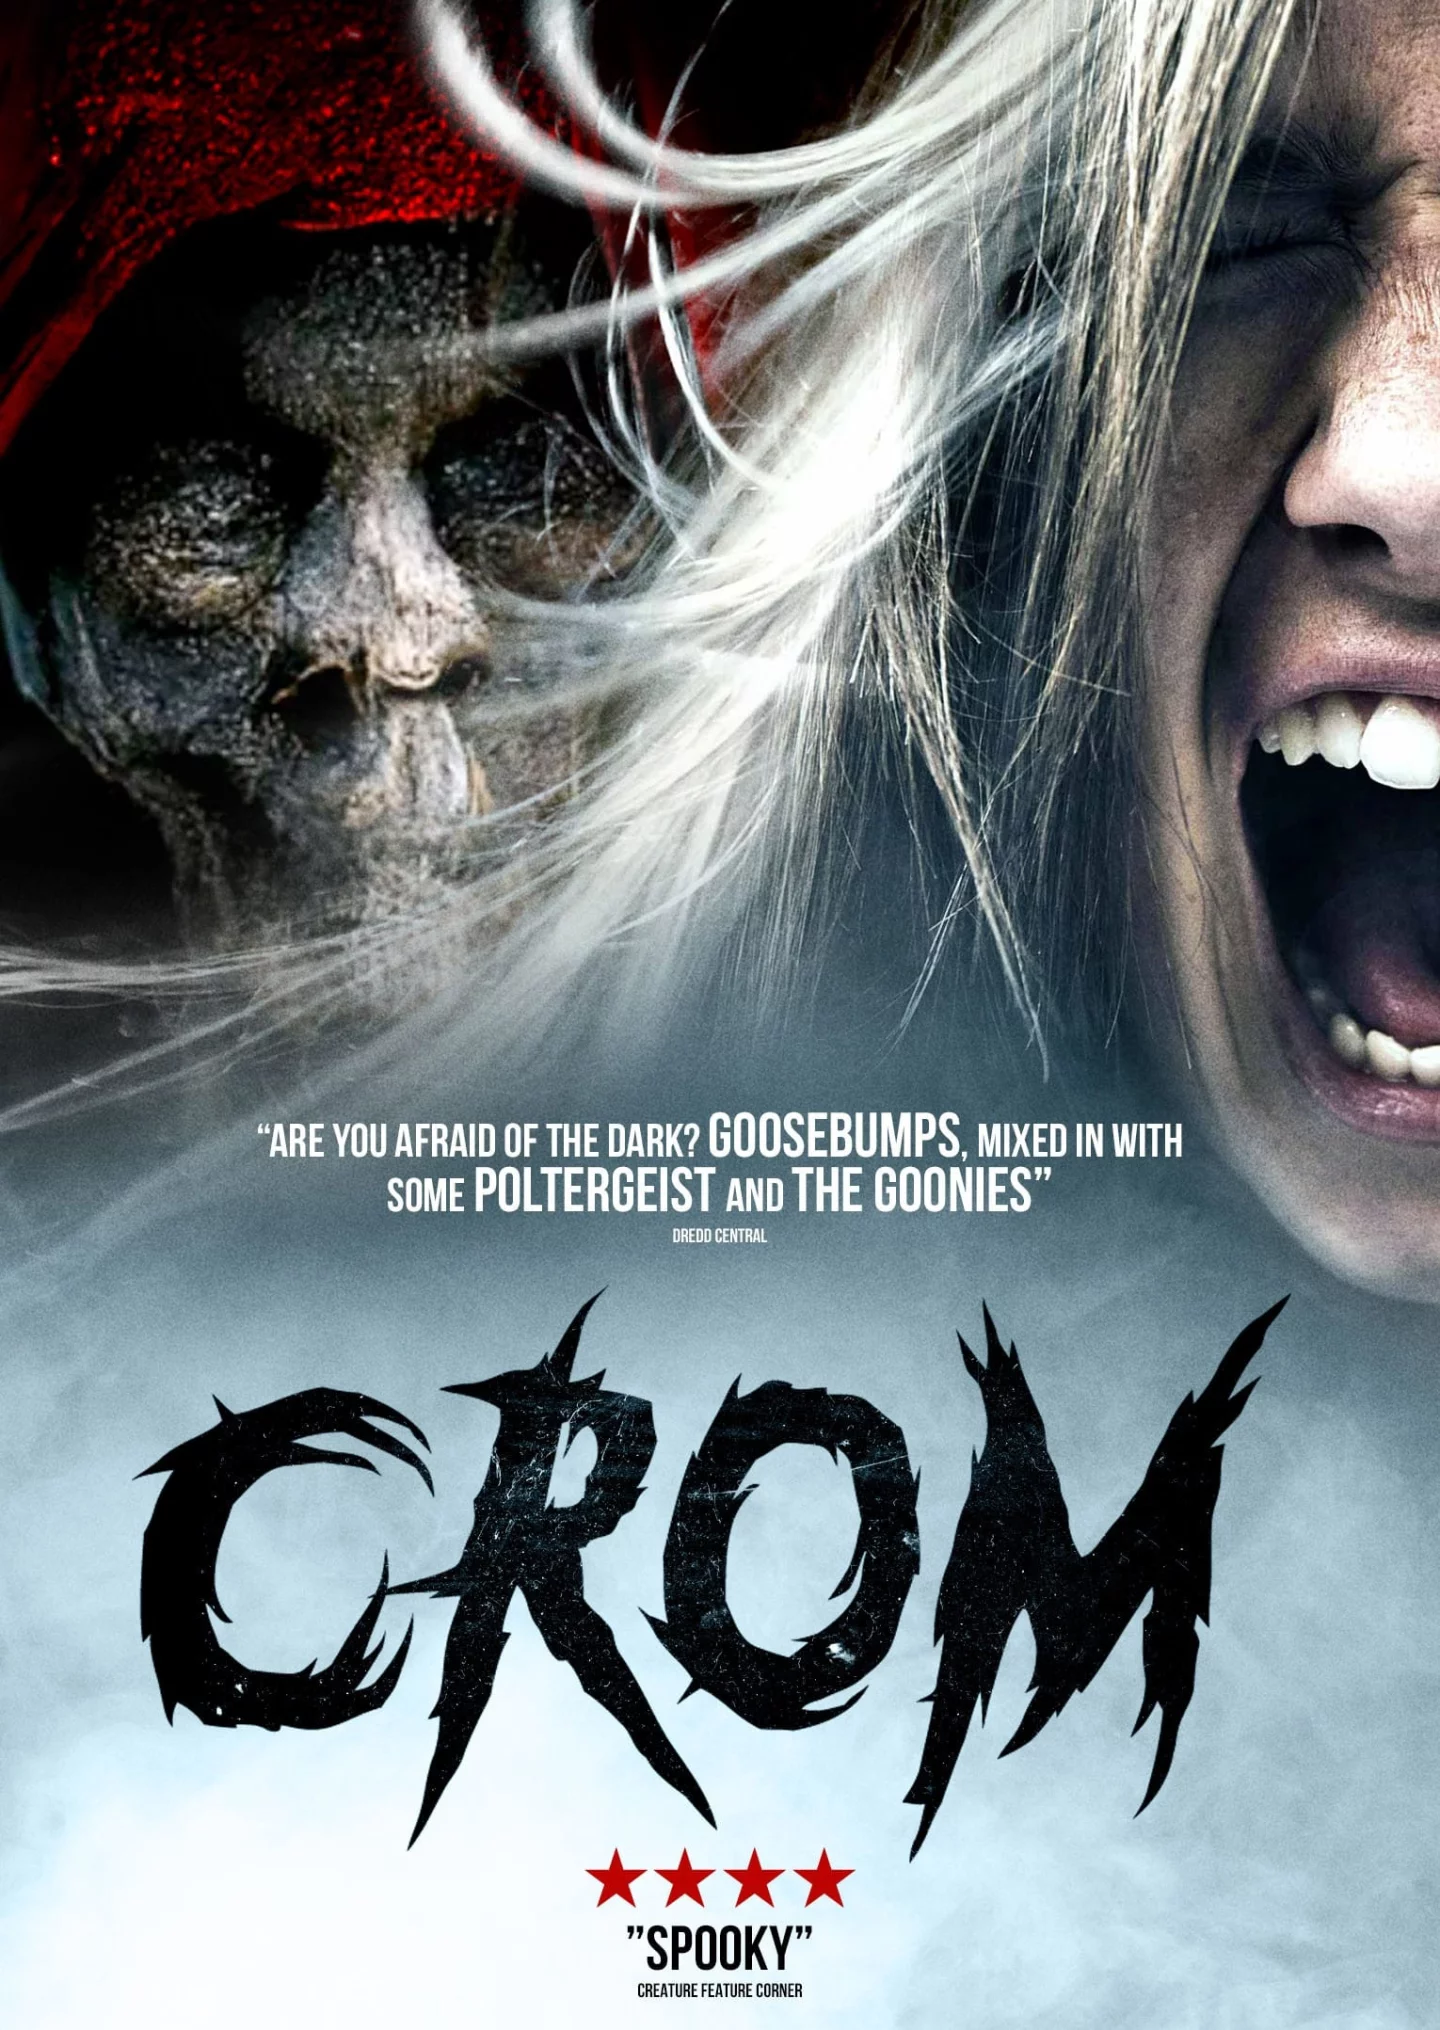 Photo du film : Curse of Crom: The Legend of Halloween